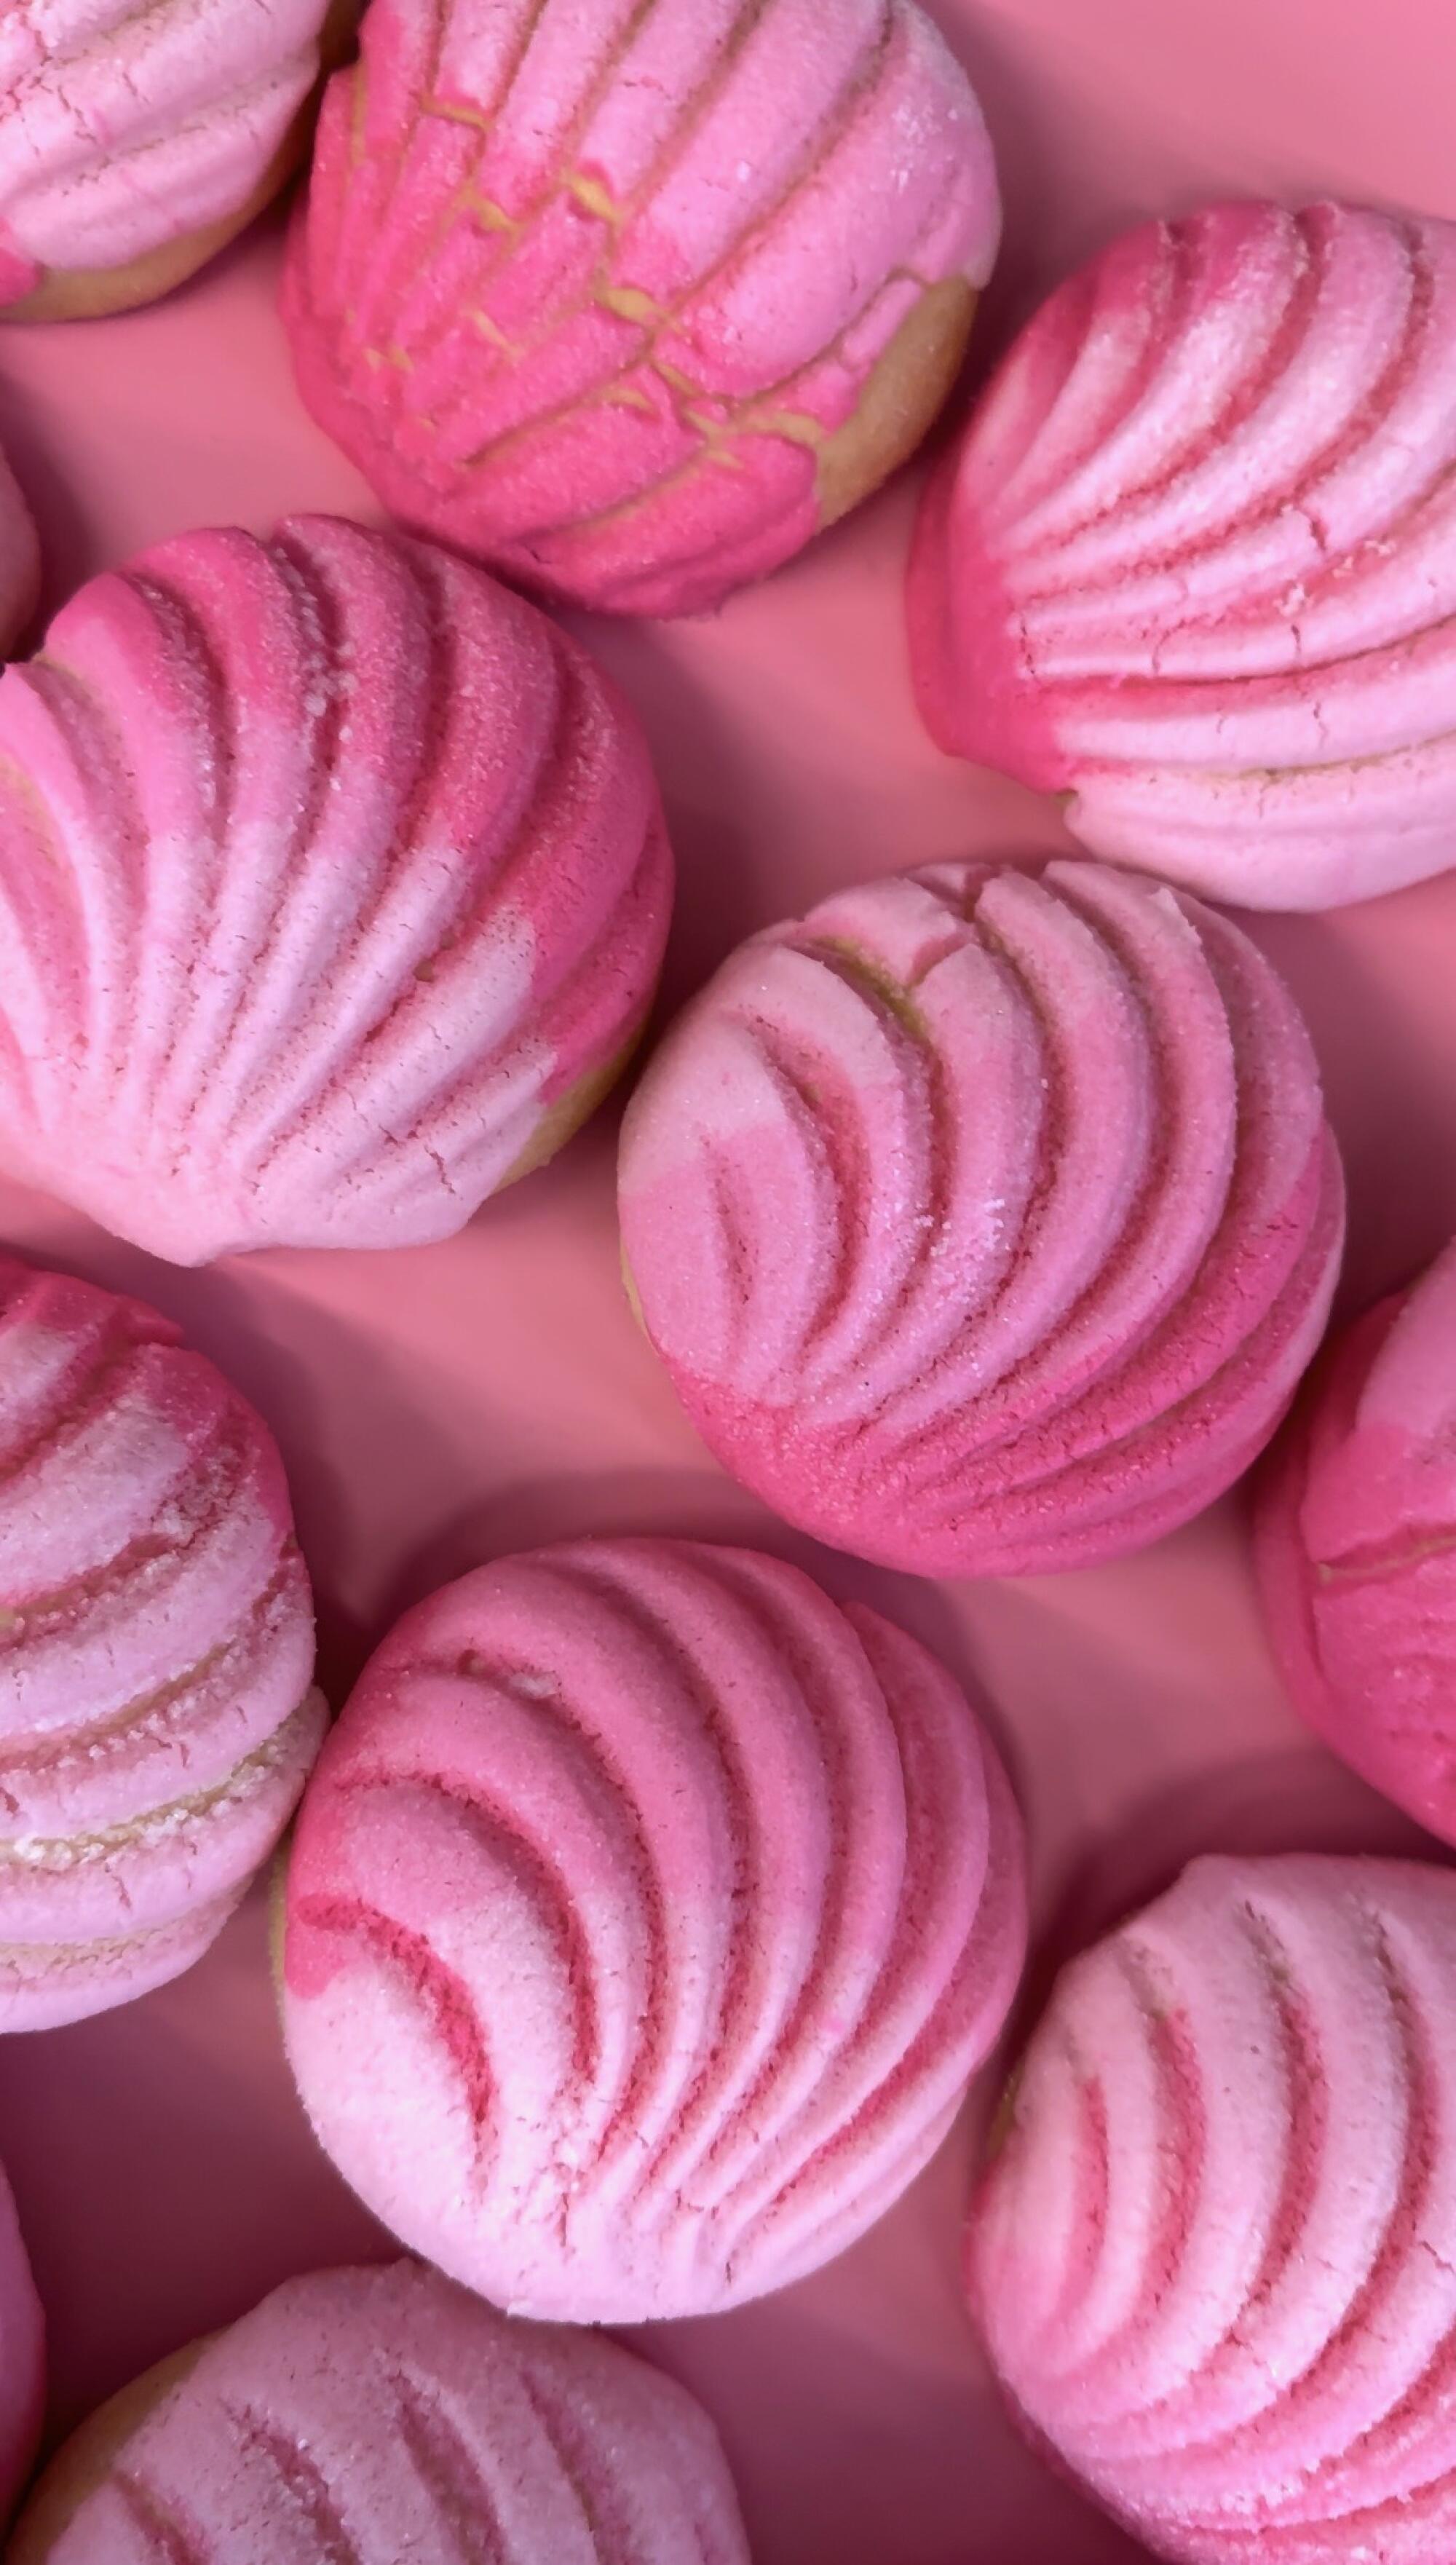 Pink conchas that were inspired by the new "Barbie" movie.